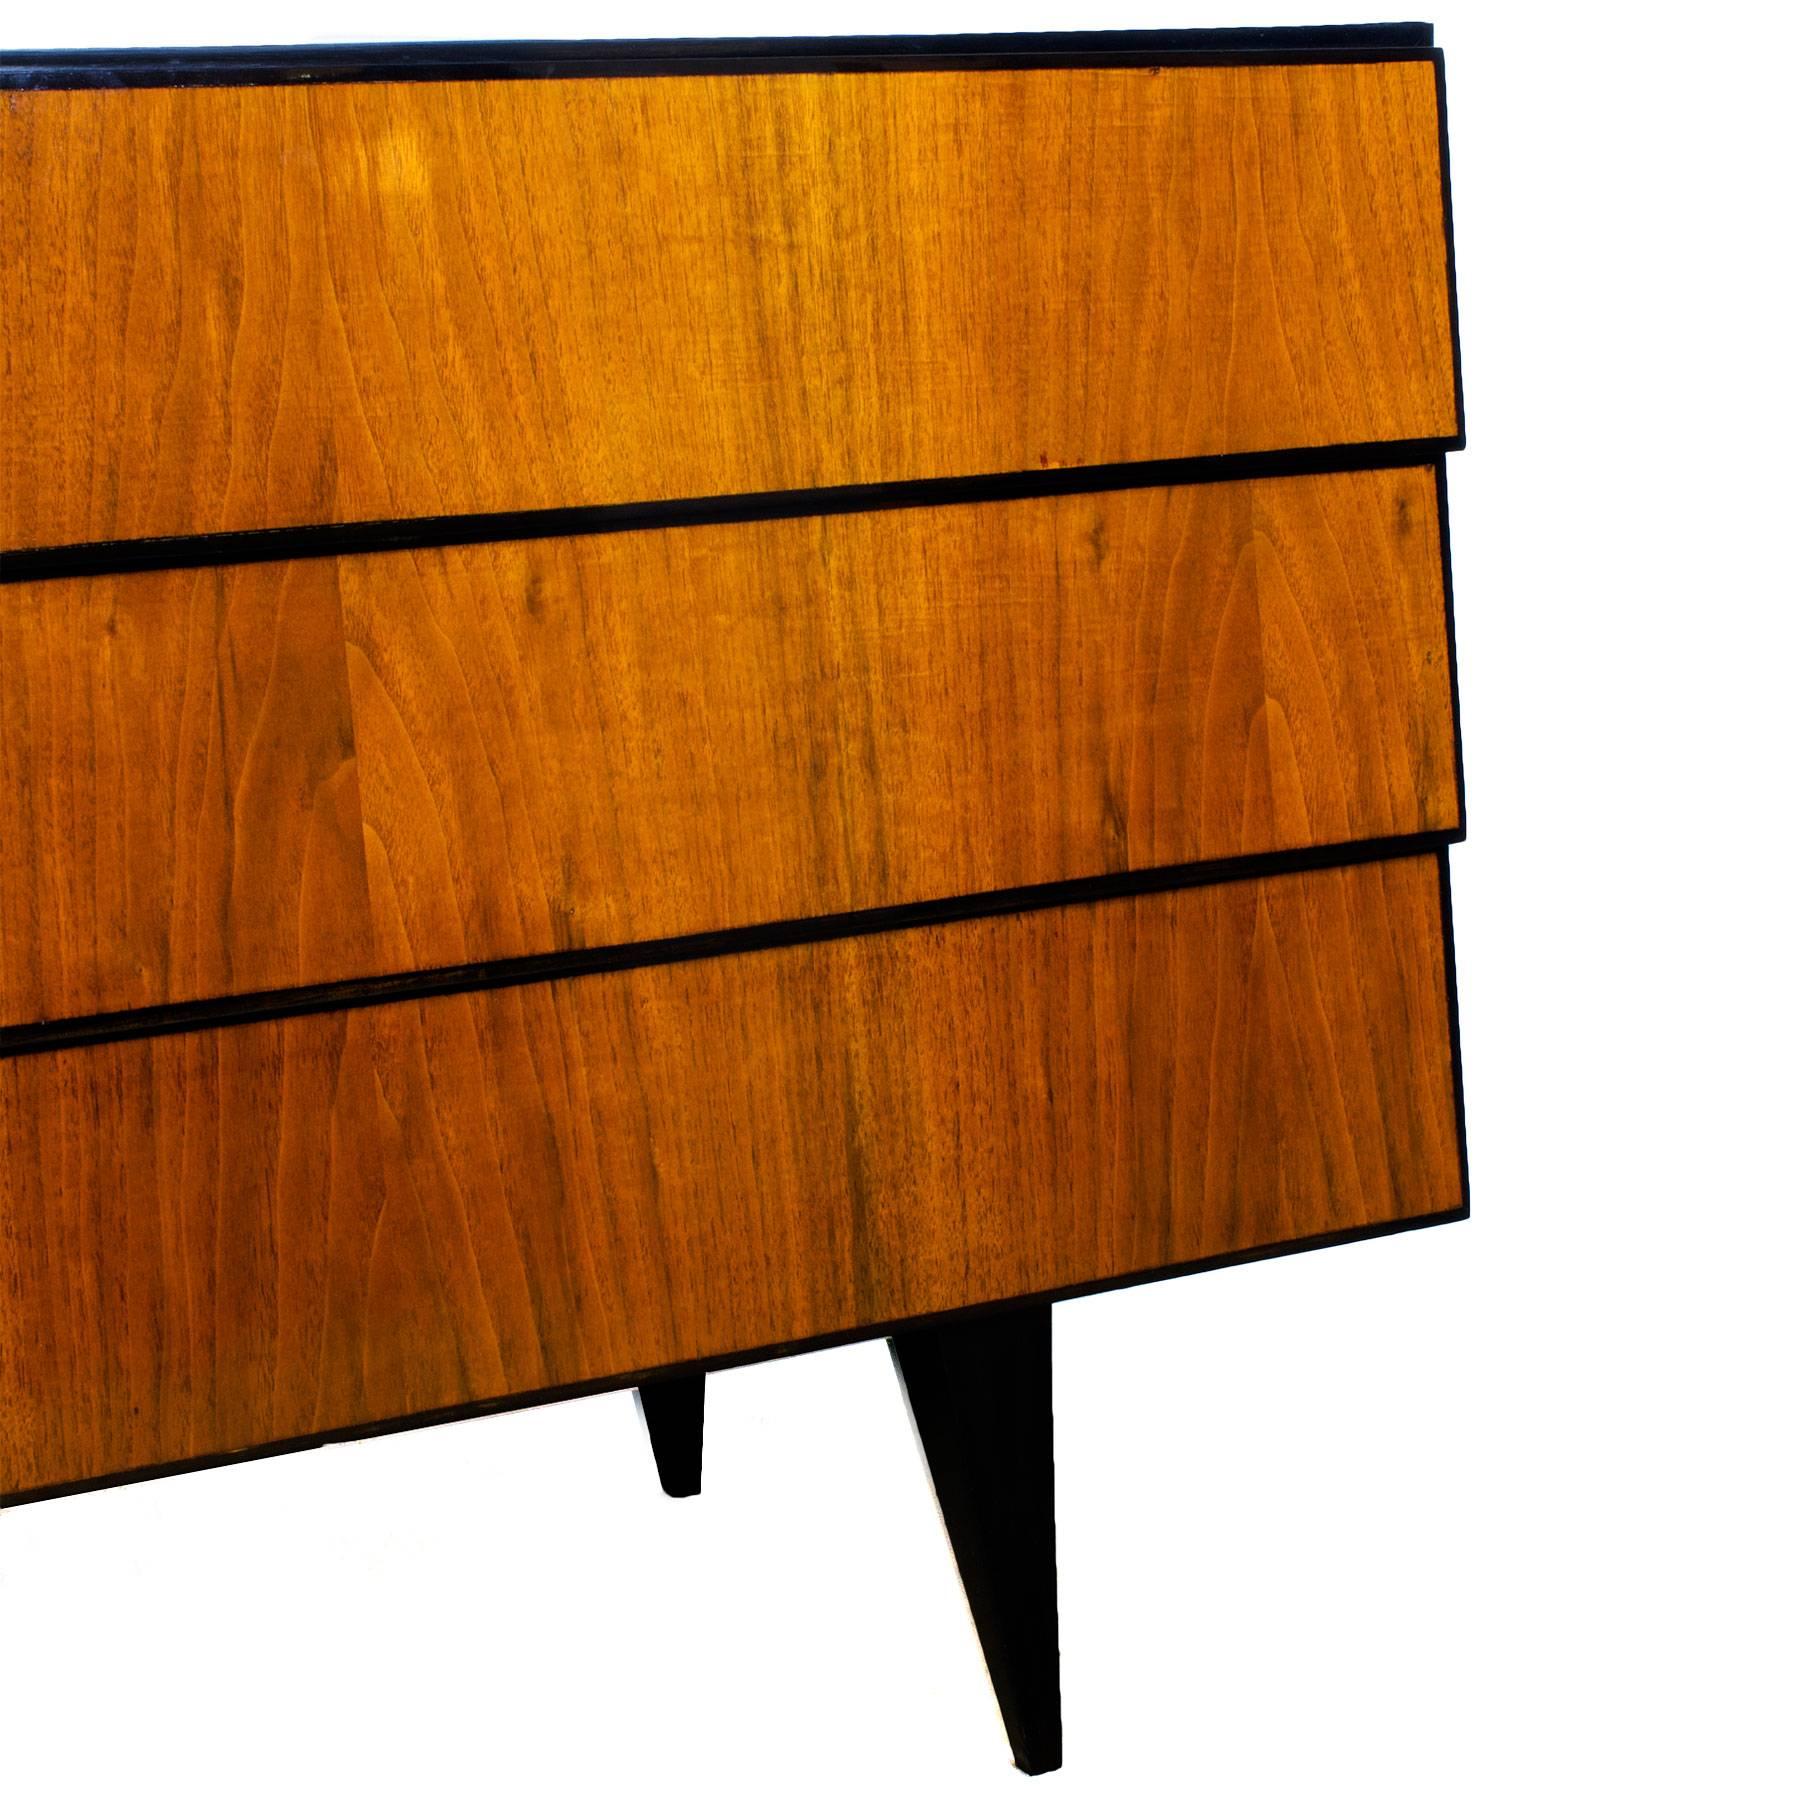 Mid-20th Century 1950s Long Commode with Six Drawers, Walnut Veneer, Italy